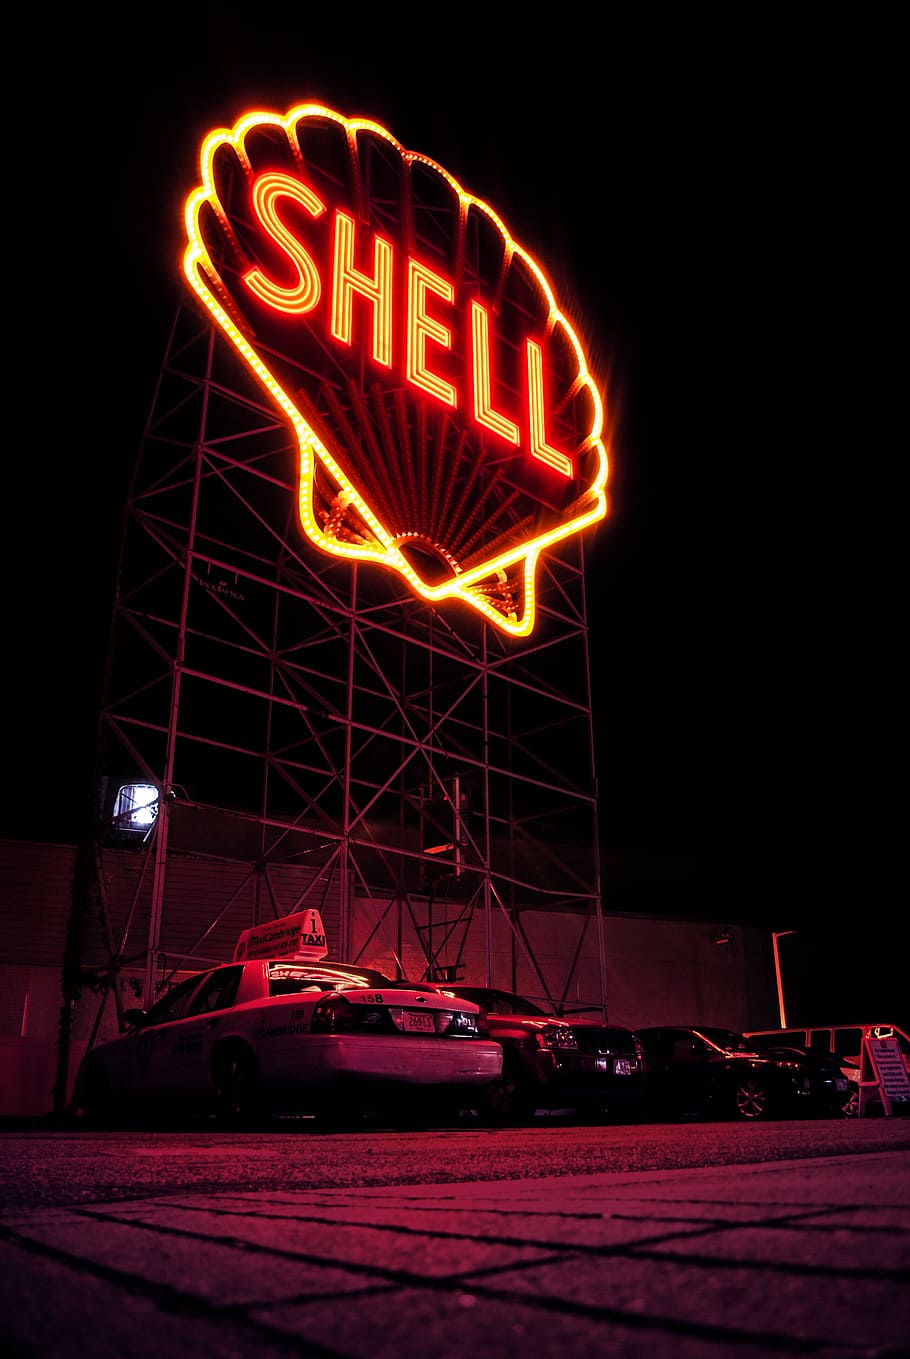 Shell LED signage, night, light, car, graphic, glow, taxi, neon, HD wallpaper